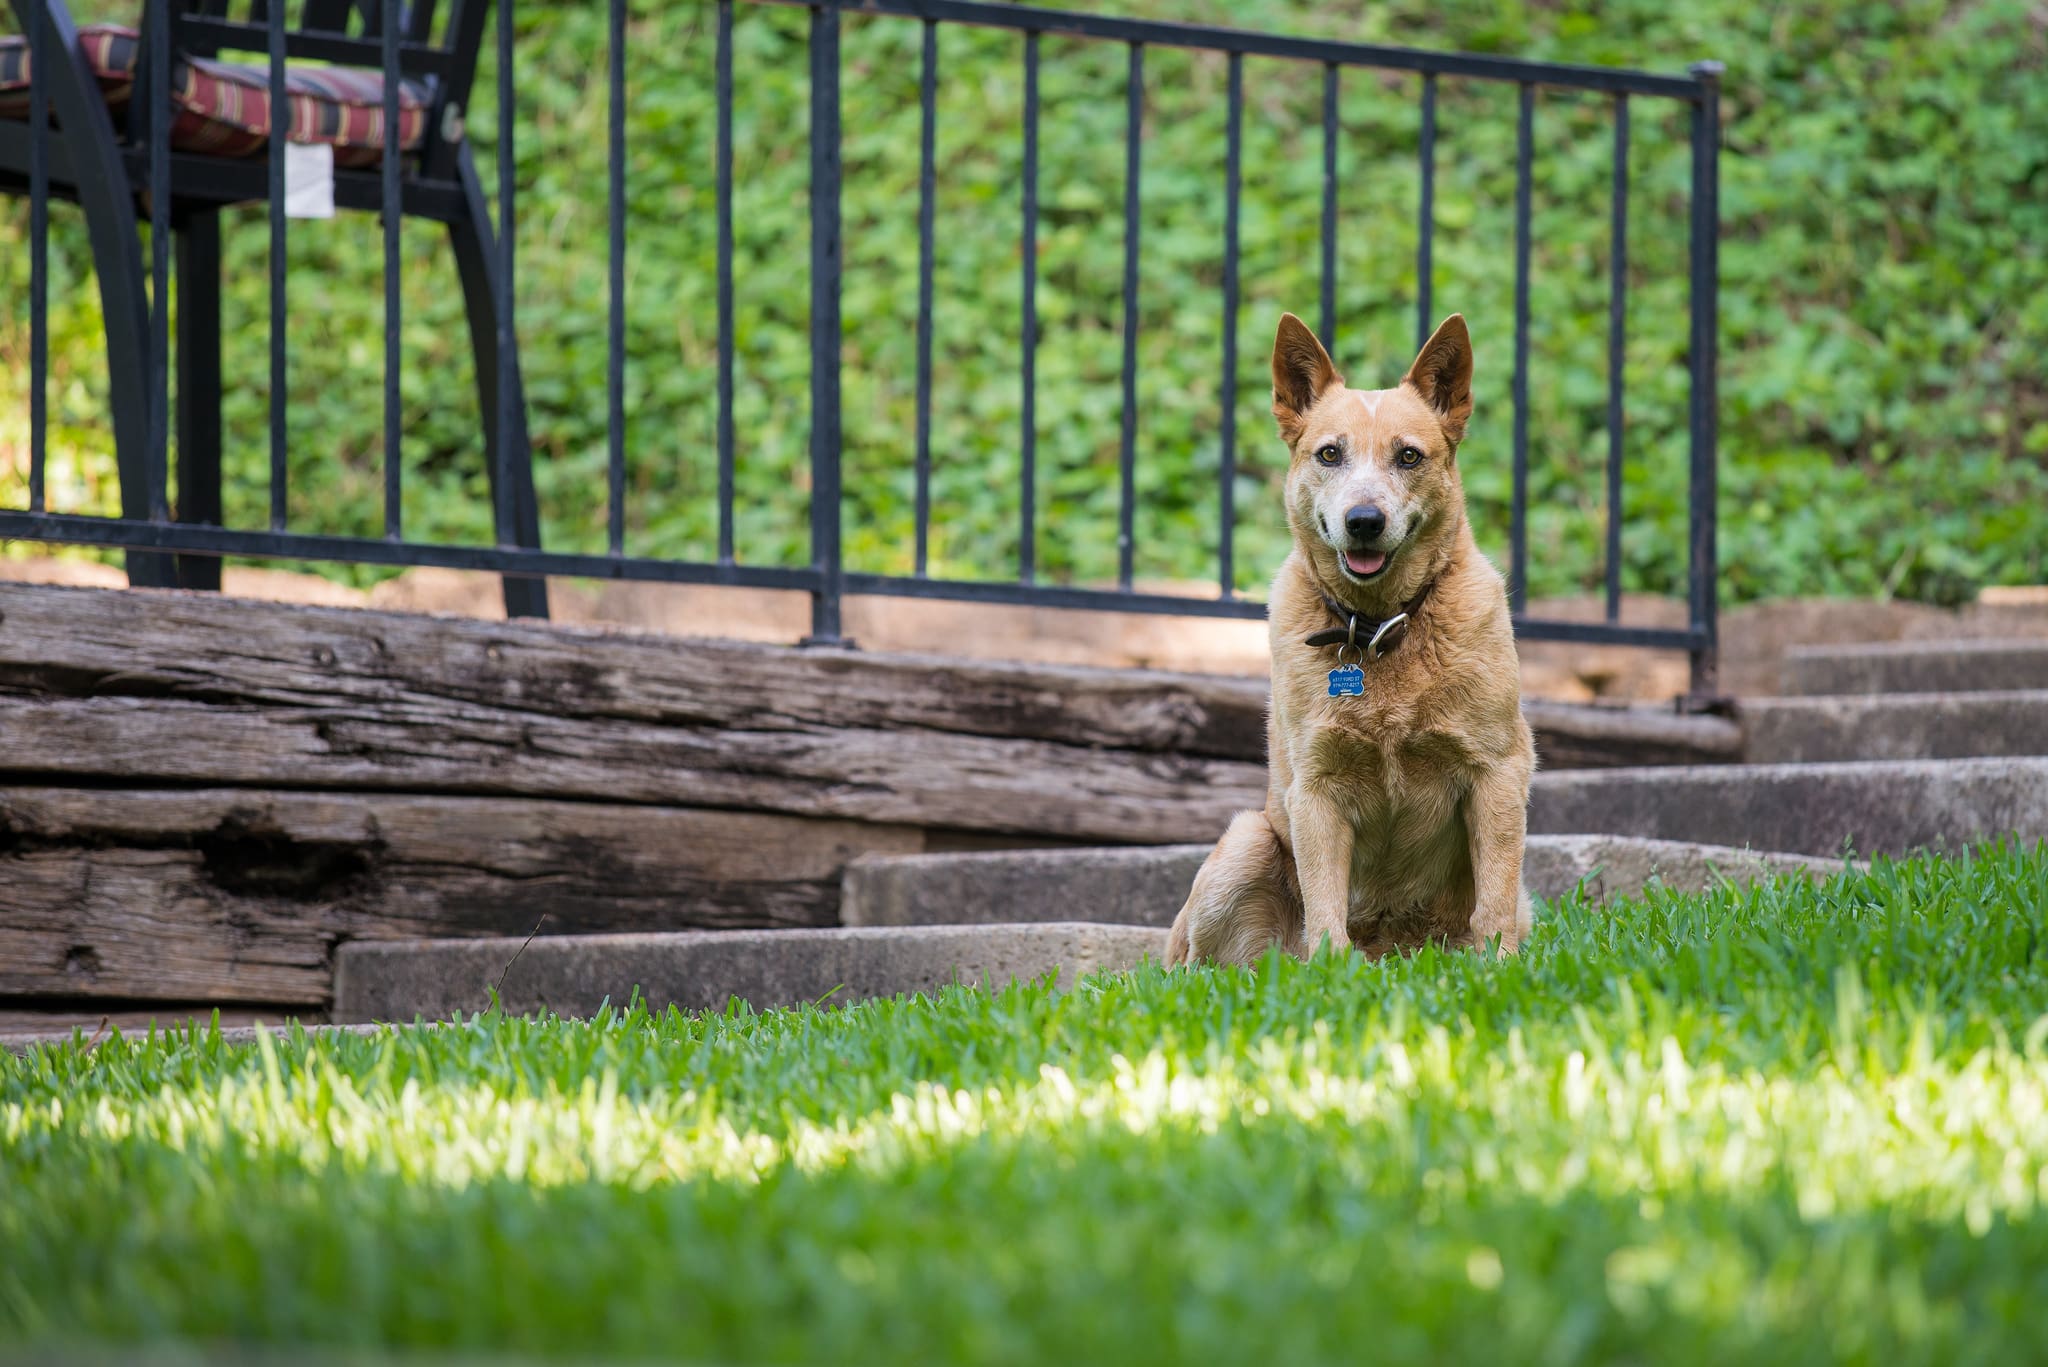 Stop barking now: The 3 best ultrasonic bark control devices